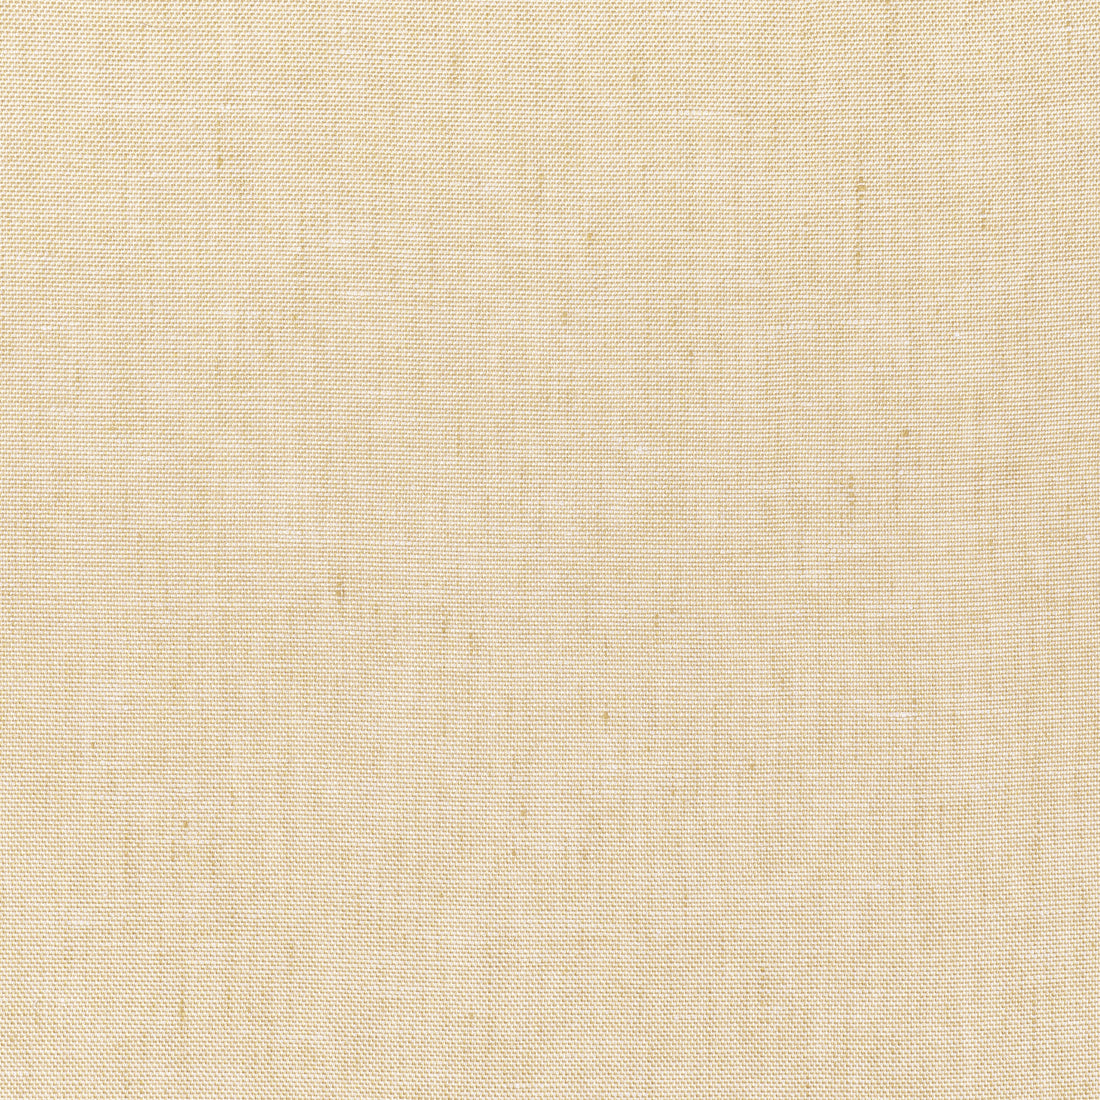 Skye Linen fabric in sahara color - pattern number FWW7621 - by Thibaut in the Palisades collection